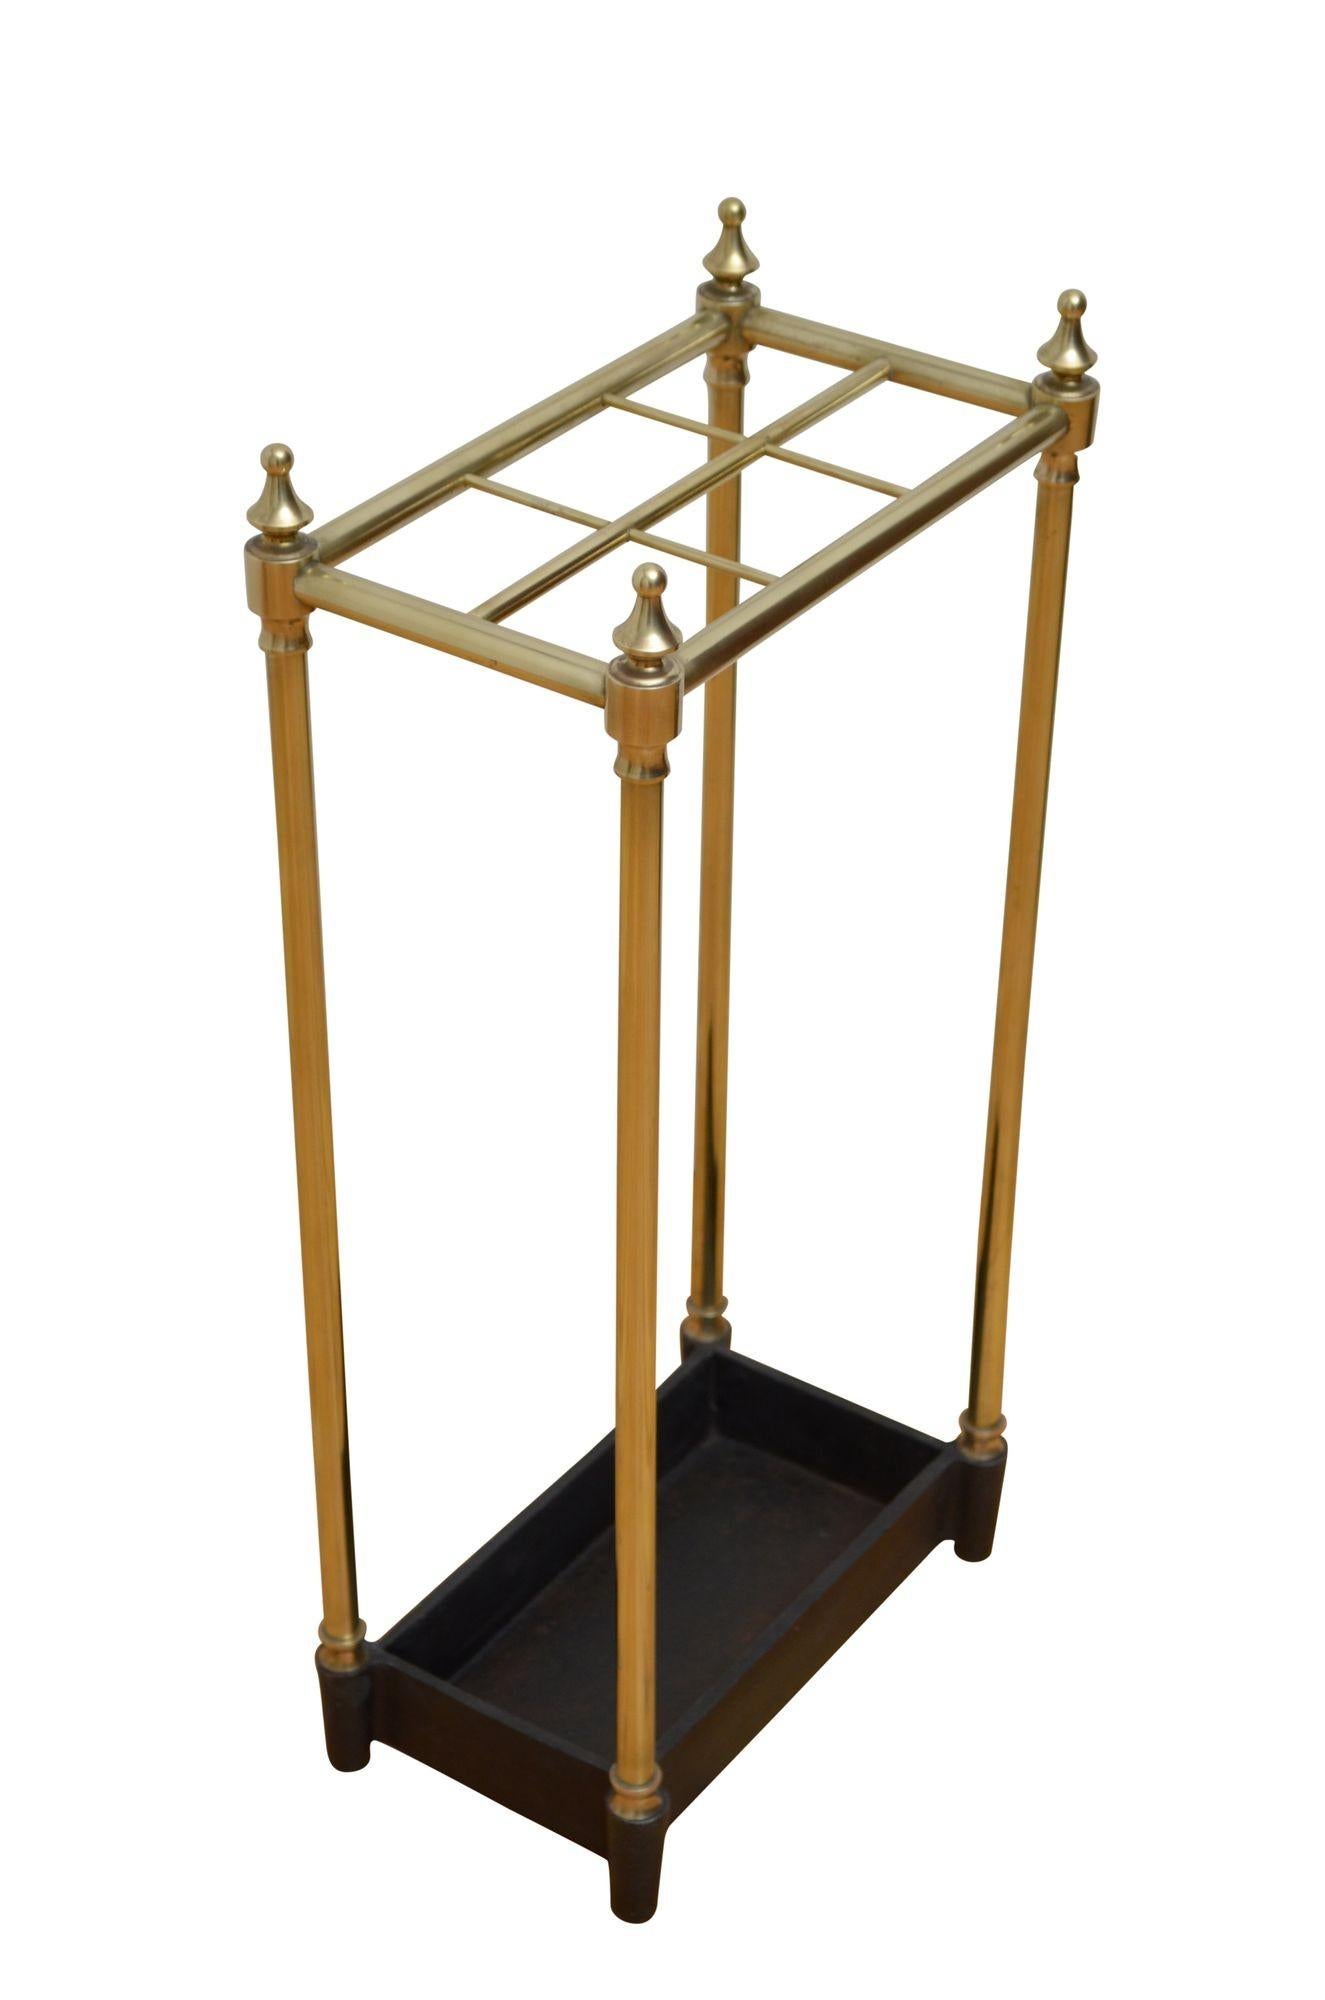 Edwardian Brass Umbrella Stand In Good Condition For Sale In Whaley Bridge, GB